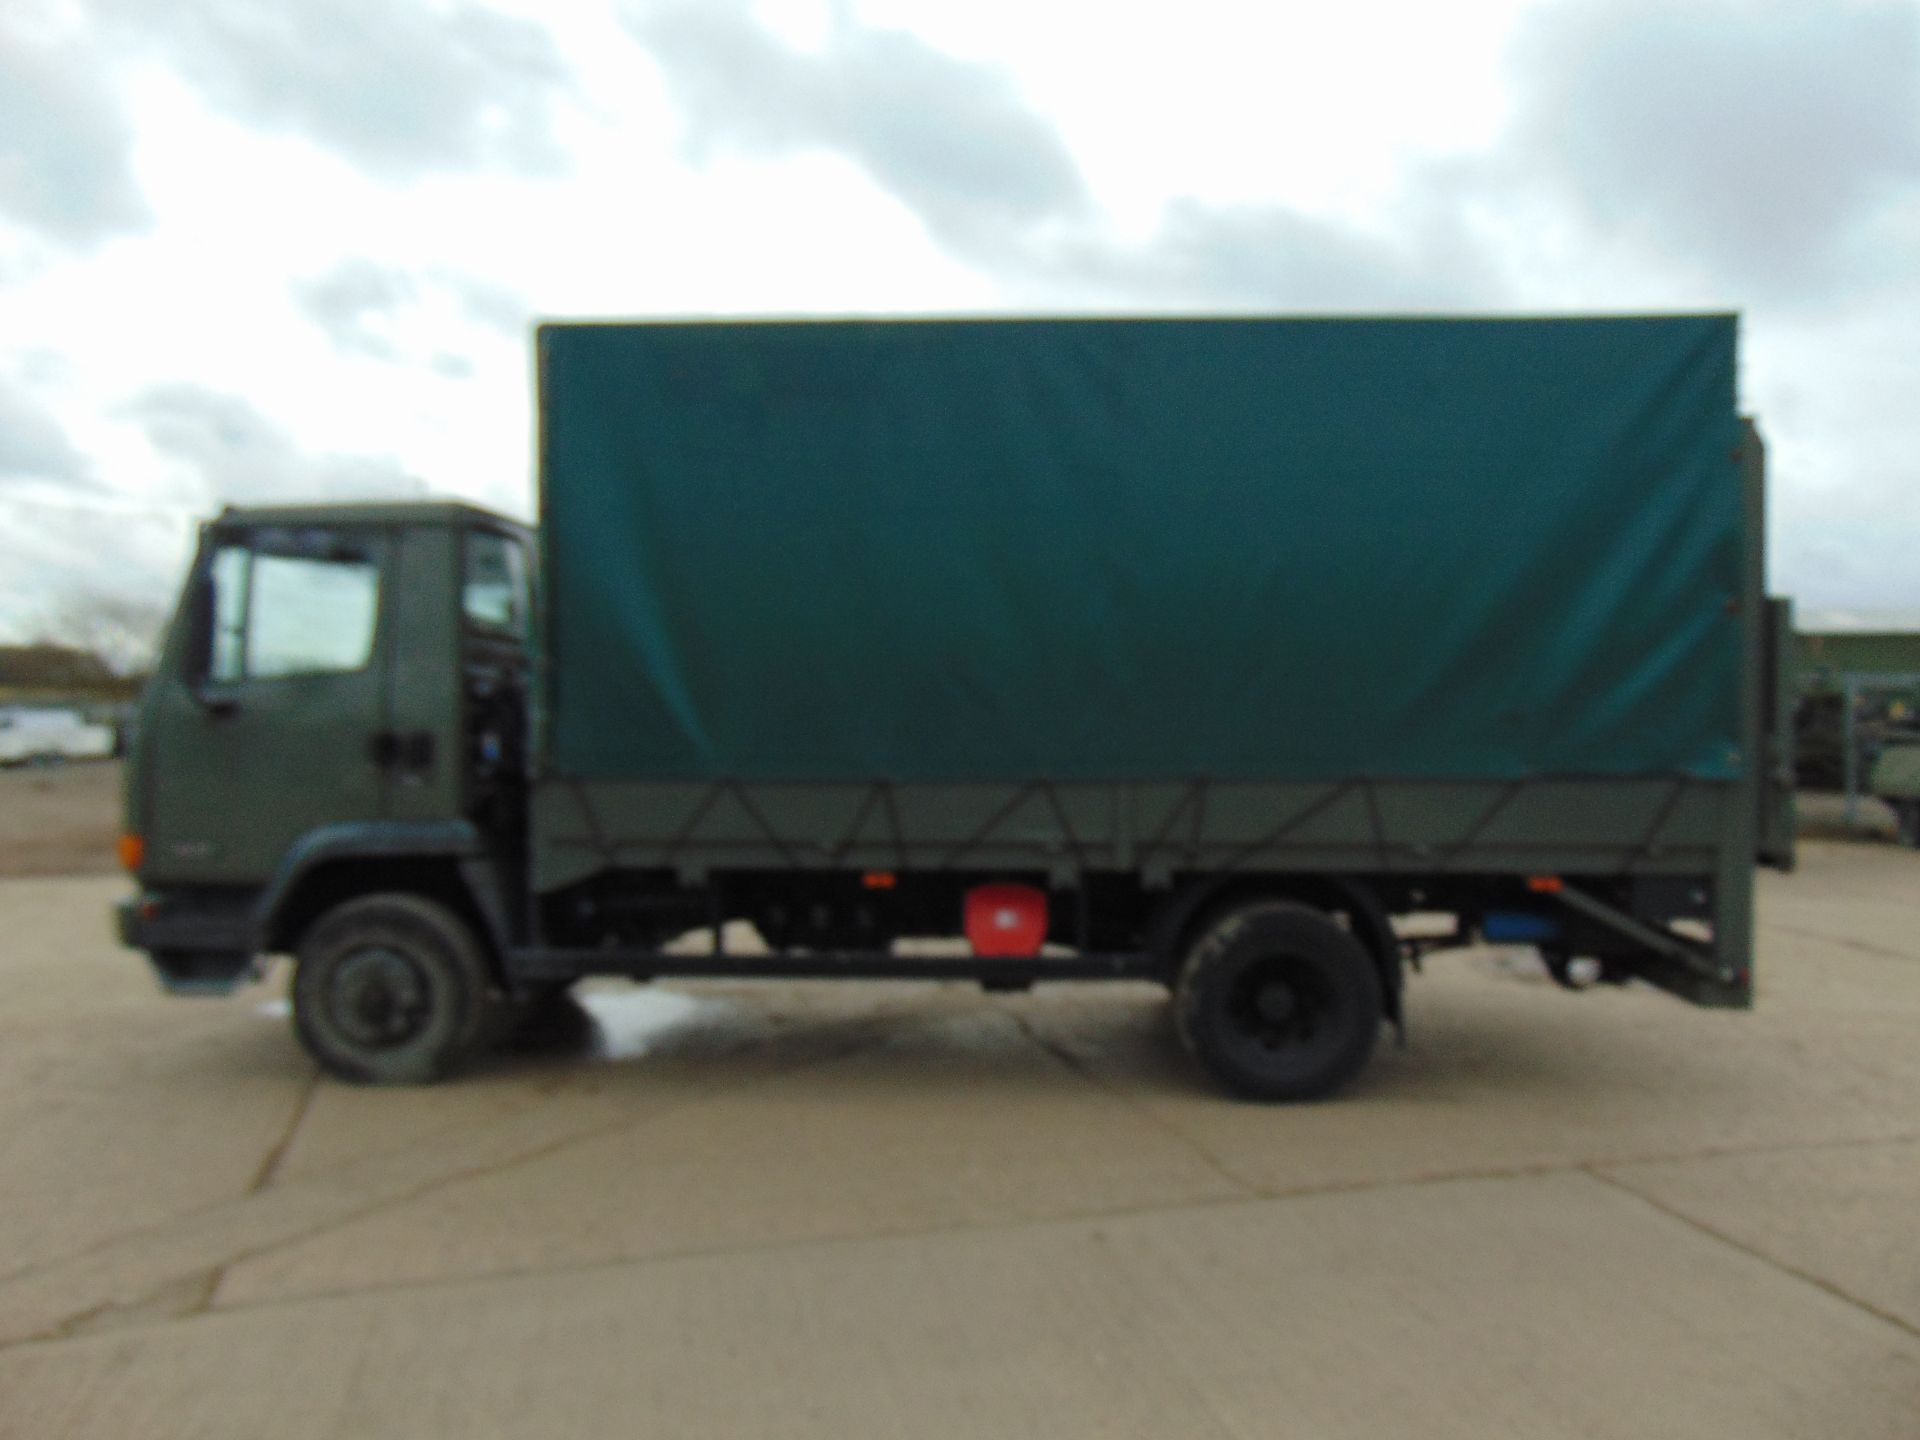 Leyland Daf 45 180Ti 4 x 2 complete with Ratcliffe Tail Lift - Image 4 of 20